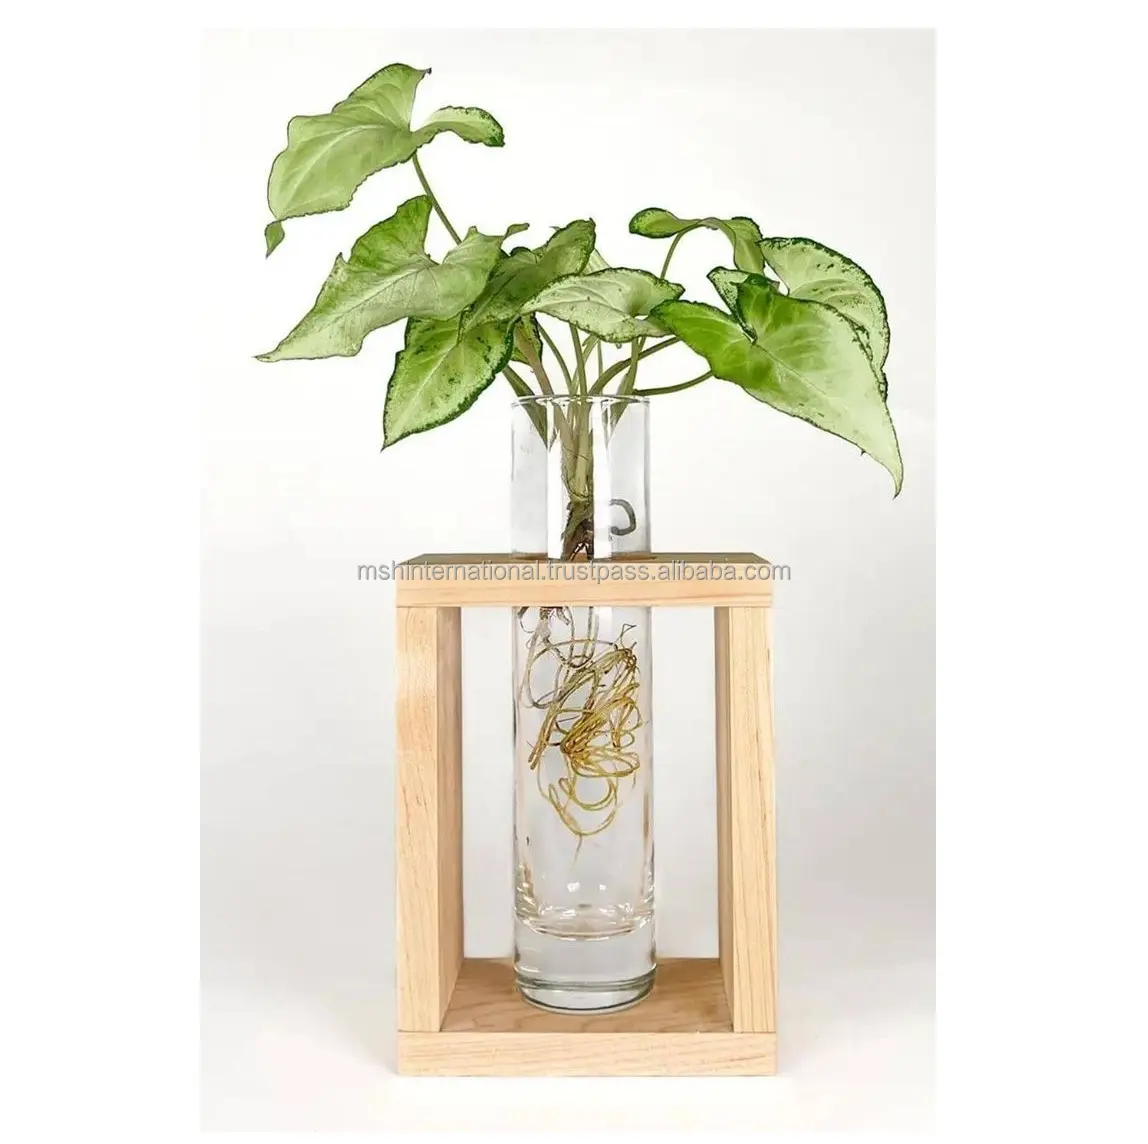 Terrarium Flower Vase with Wooden Holder for Propagation Hydroponic Water Plants Home Office Desktop 3 Test Tubes Glass Planter